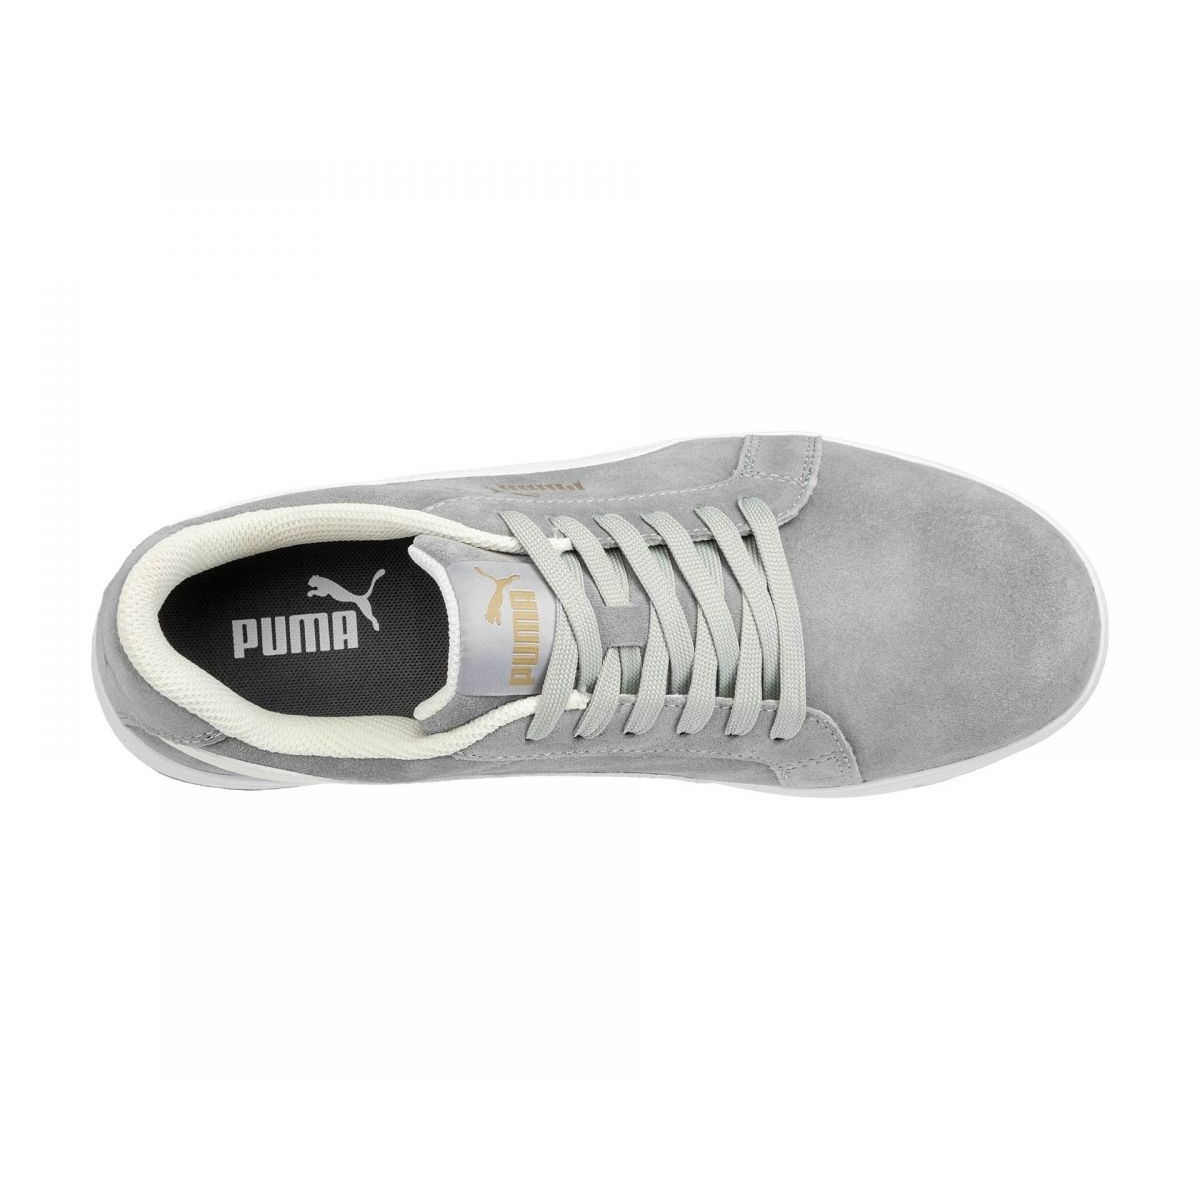 PUMA Safety Women's Iconic Low Composite Toe SD Work Shoes Grey Suede - 640125 Grey - Grey, 9